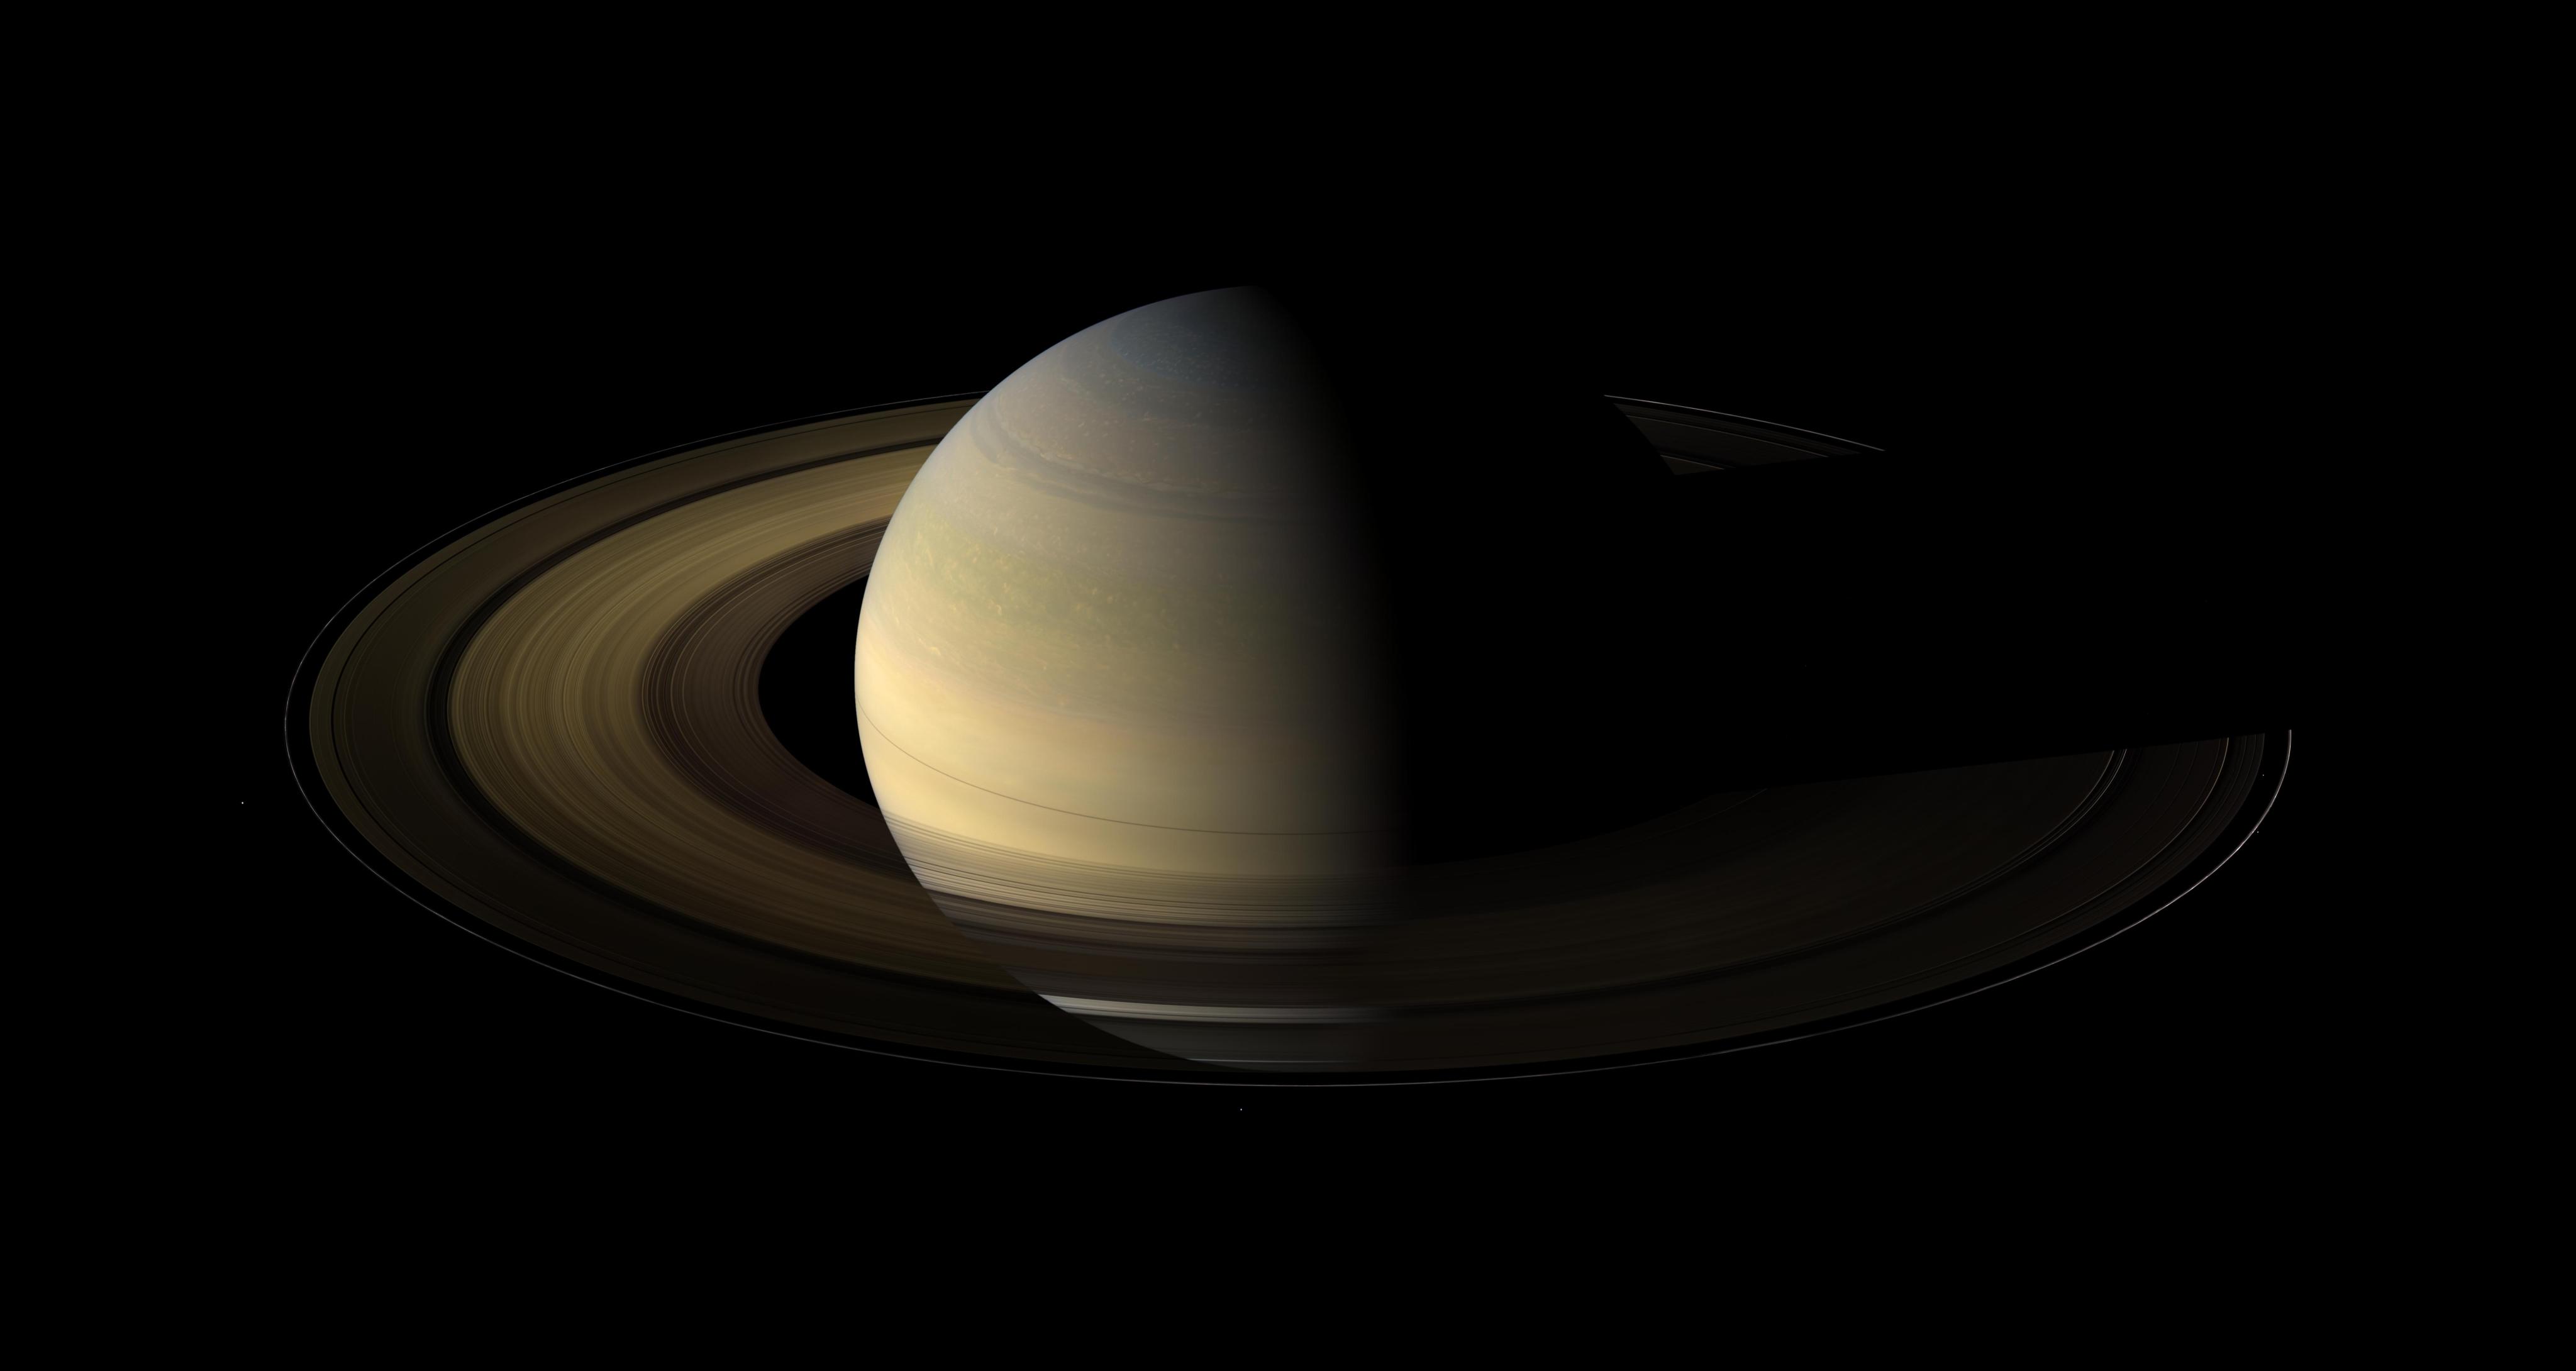 Of the countless equinoxes Saturn has seen since the birth of the solar system, this one, captured here in a mosaic of light and dark, is the first witnessed up close by an emissary from Earth … none other than our faithful robotic explorer, Cassini.